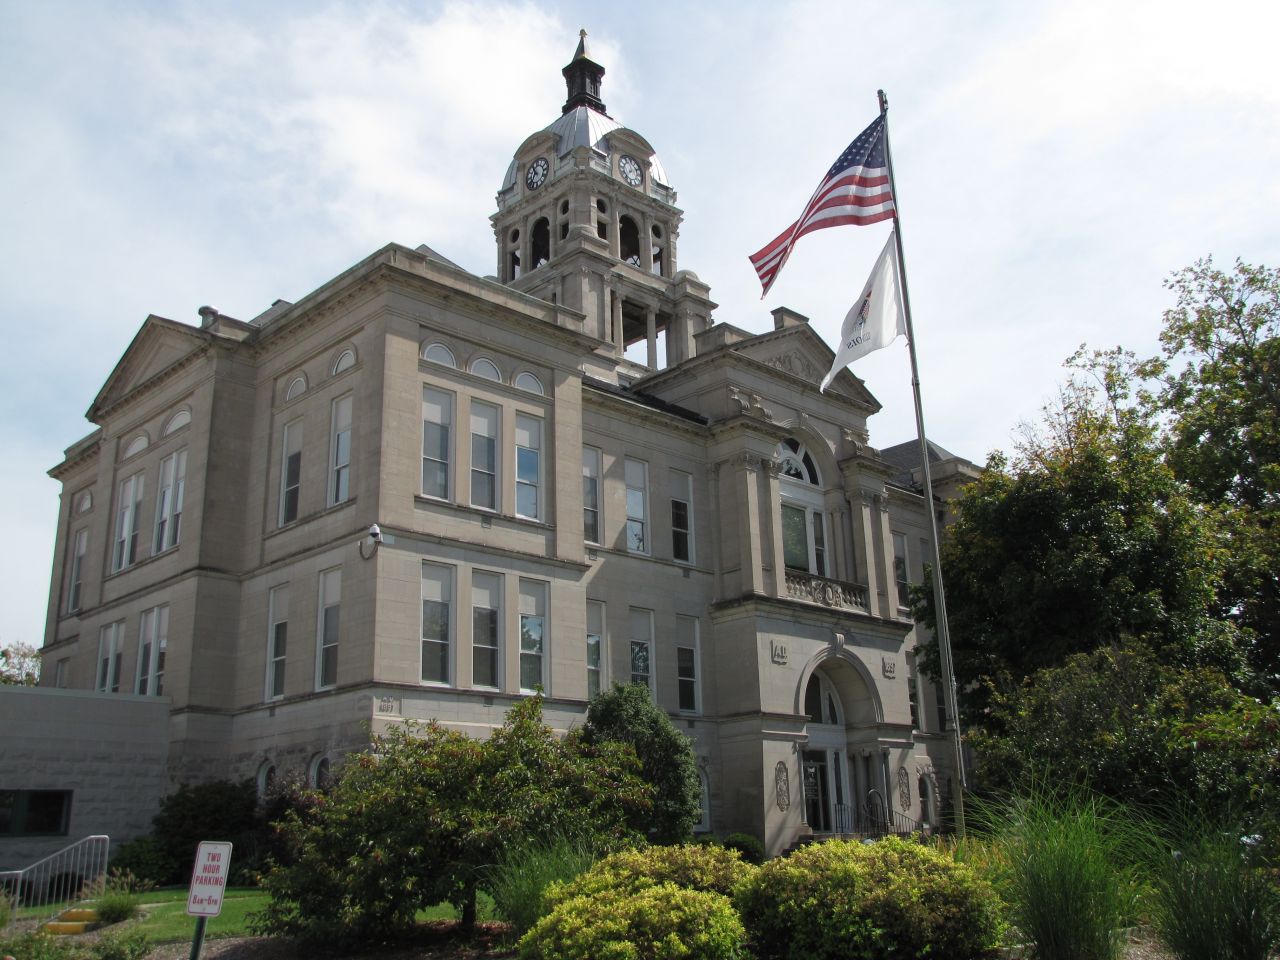 The Woodford County Courthouse was built in Eureka in 1897 for $90,000.